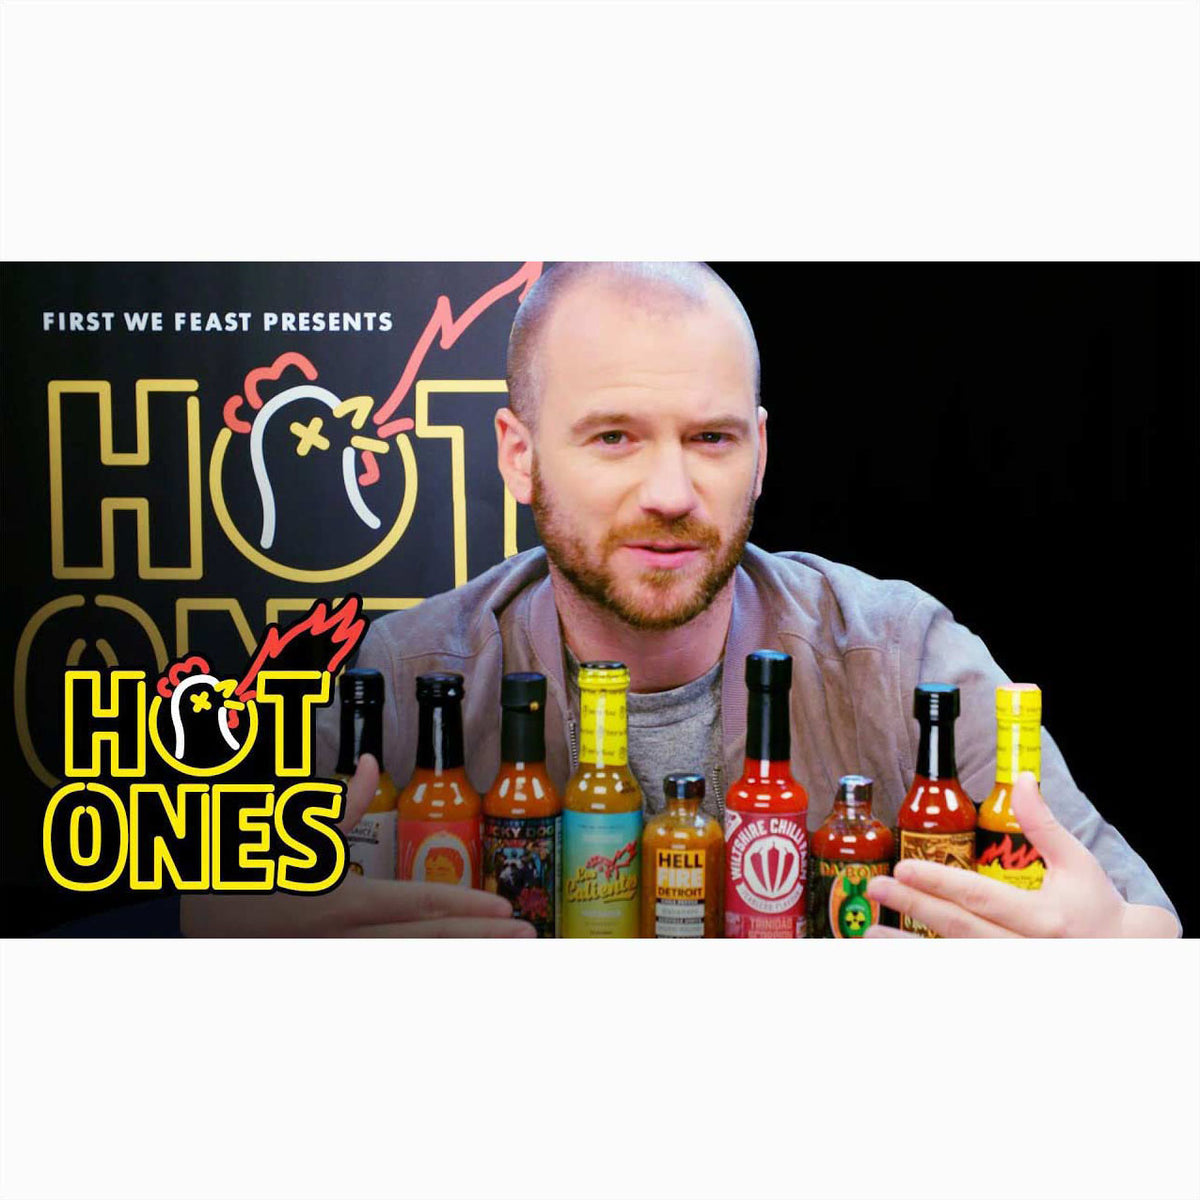 Yeeha!!! We are on Hot Ones - Season 9!!! – Hell Fire Detroit